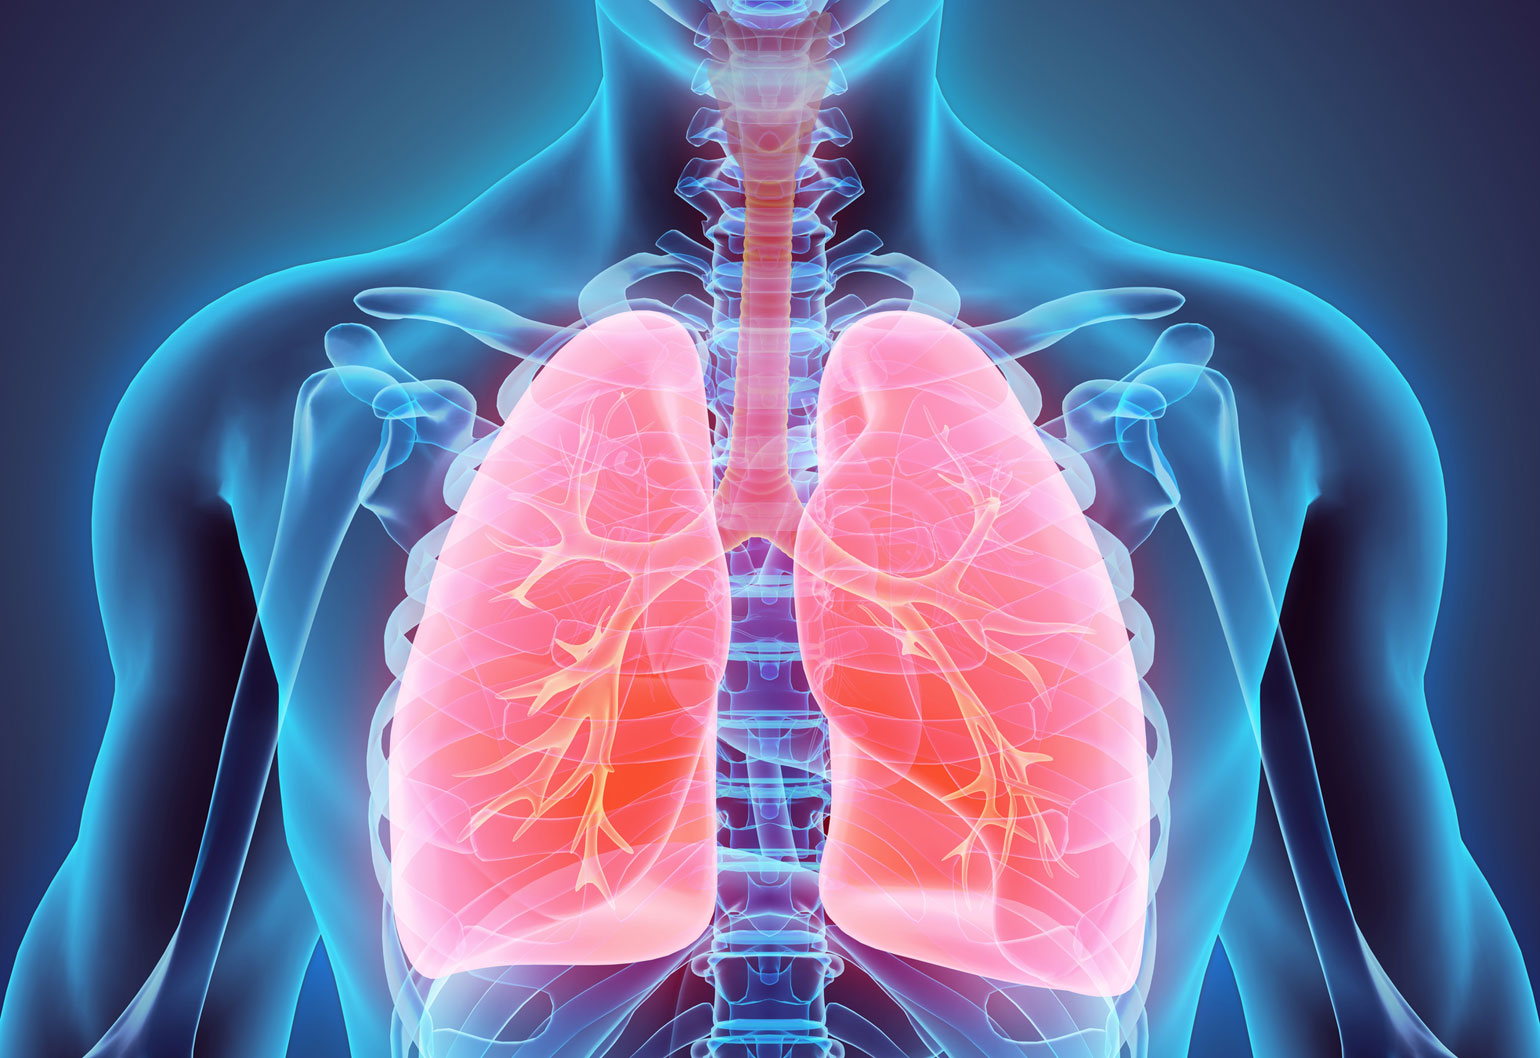 Nanotechnology is helping those with lung disease breathe easier Create